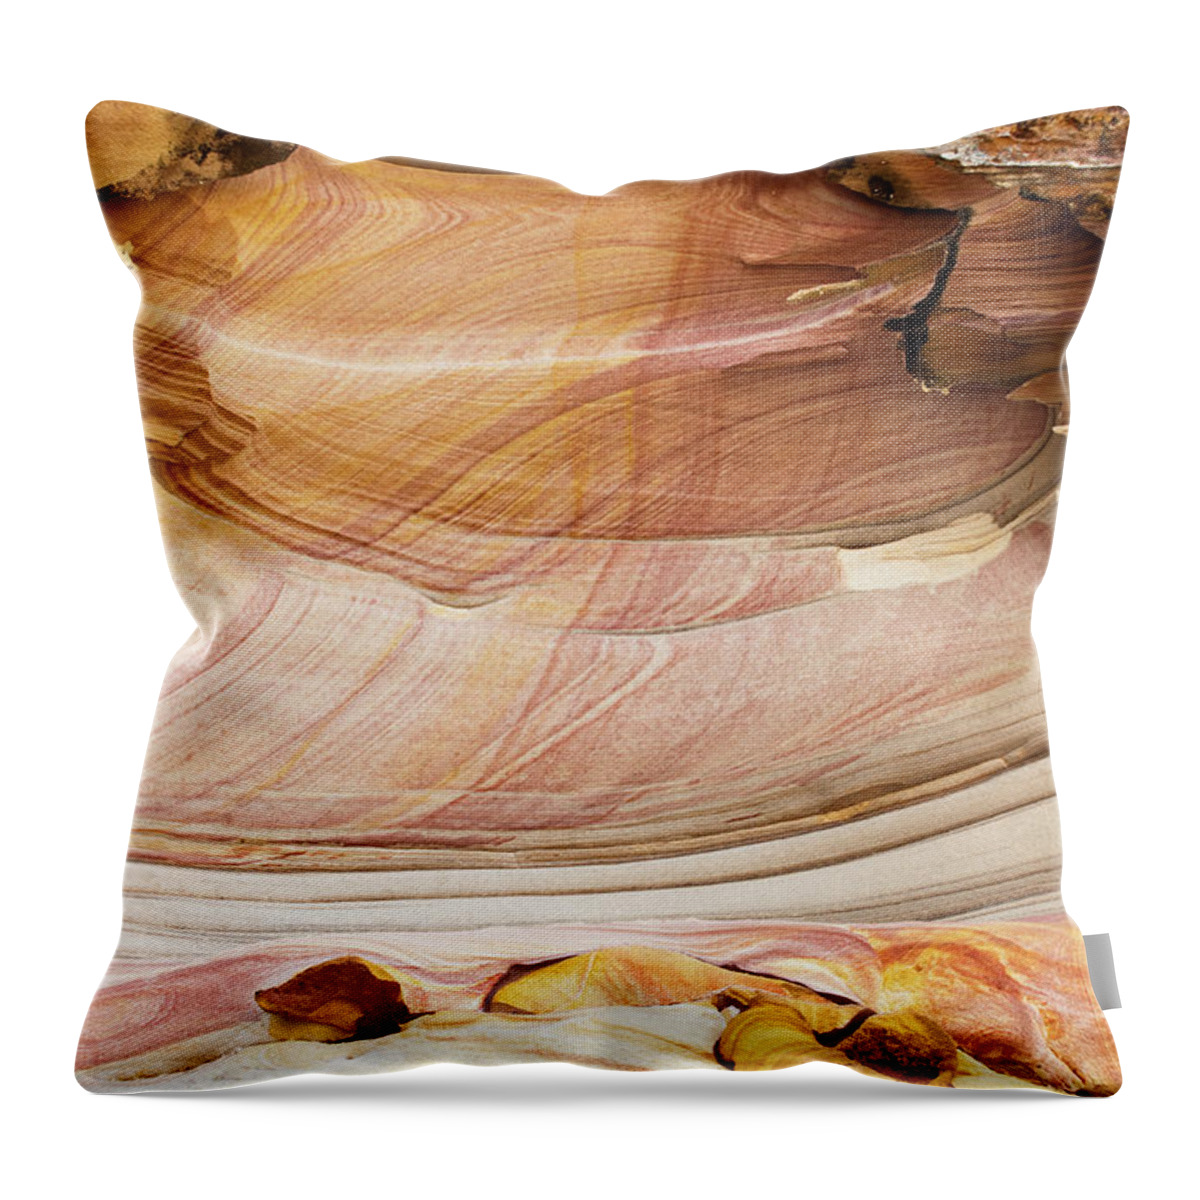 Scenics Throw Pillow featuring the photograph Colourful Sandstone Formations On Telok by Anders Blomqvist